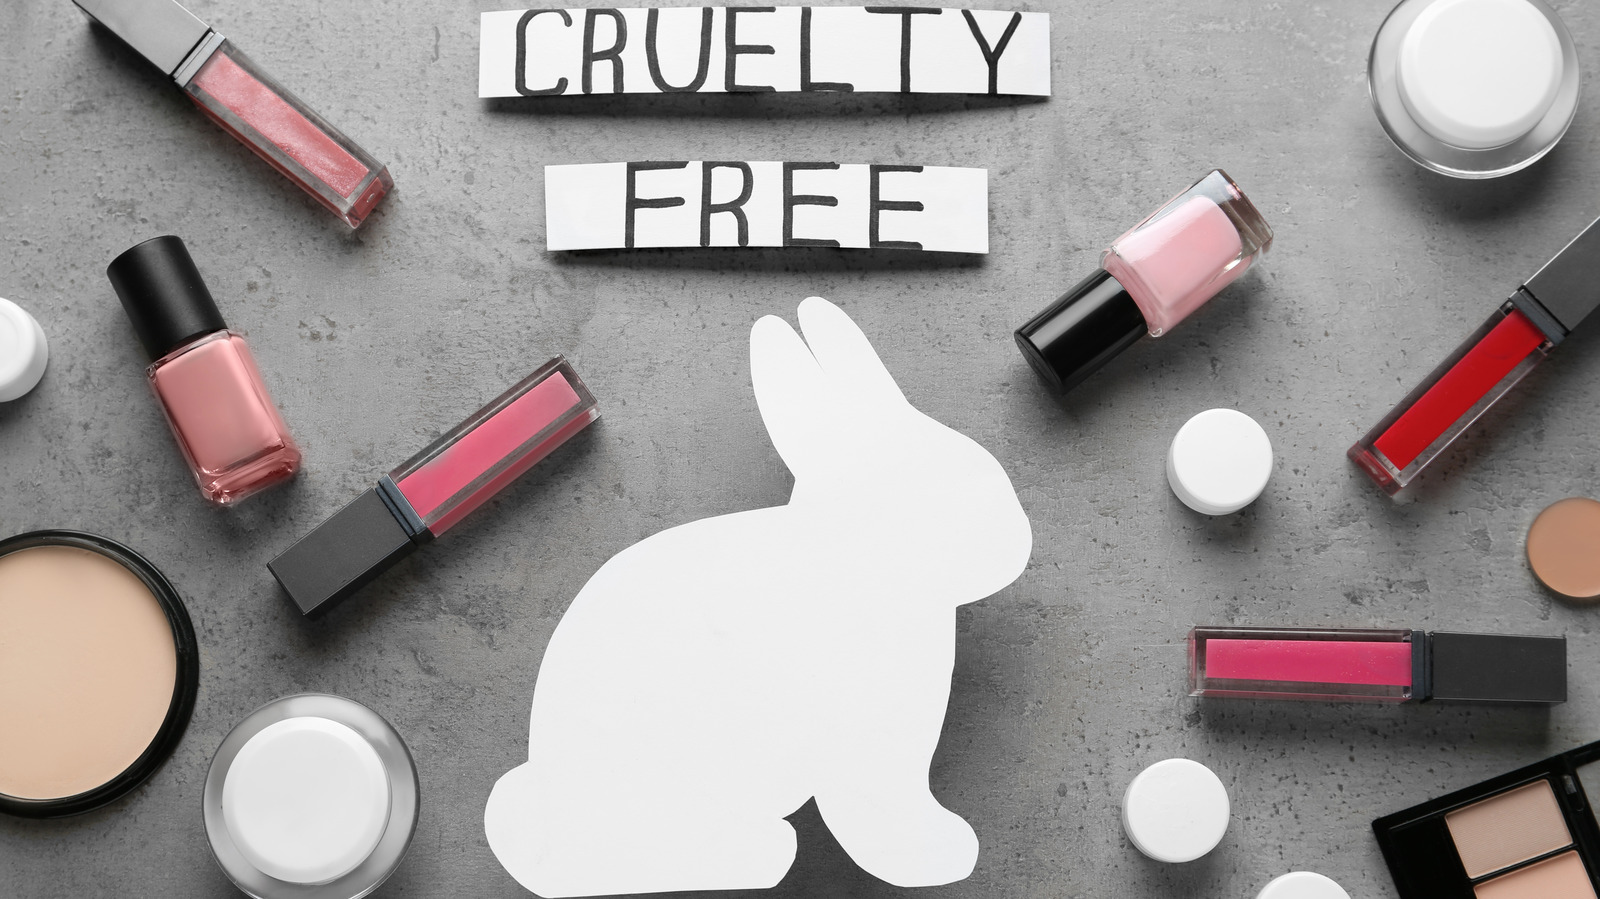 Is Benefit Cruelty-Free? Here's The Astounding Truth